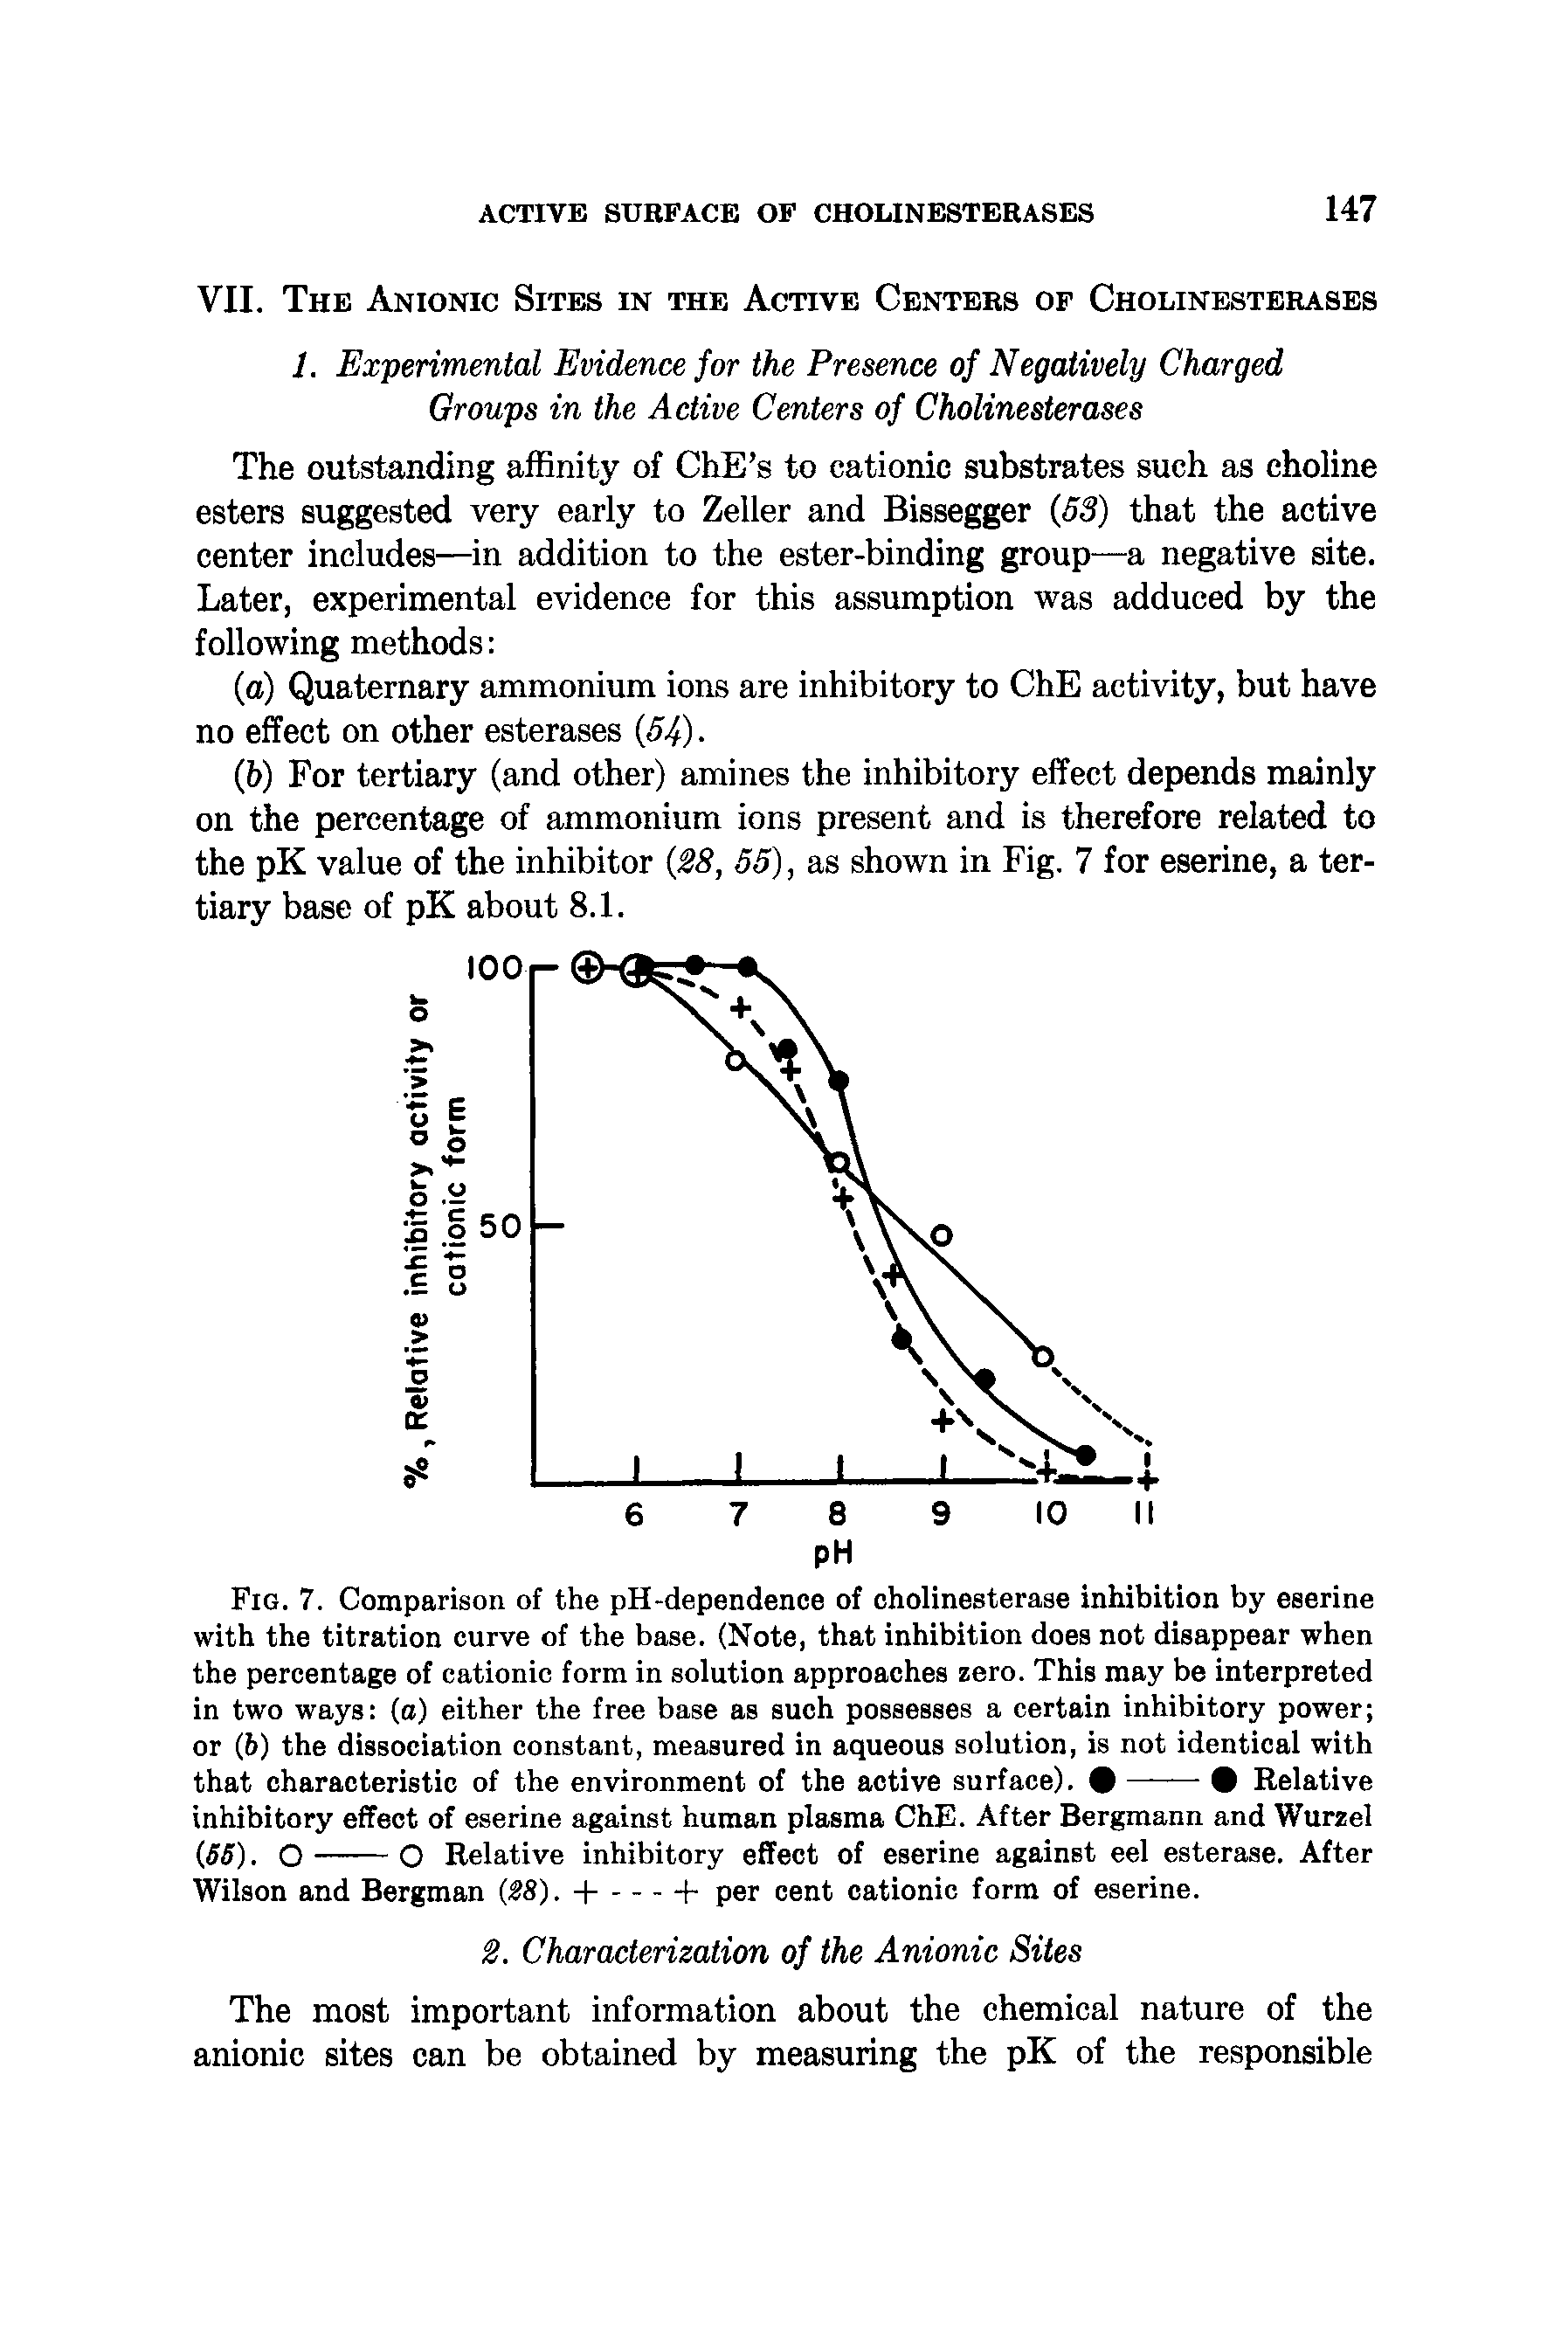 Fig. 7. Comparison of the pH-dependence of cholinesterase inhibition by eserine with the titration curve of the base. (Note, that inhibition does not disappear when the percentage of cationic form in solution approaches zero. This may be interpreted in two ways (a) either the free base as such possesses a certain inhibitory power or (6) the dissociation constant, measured in aqueous solution, is not identical with...